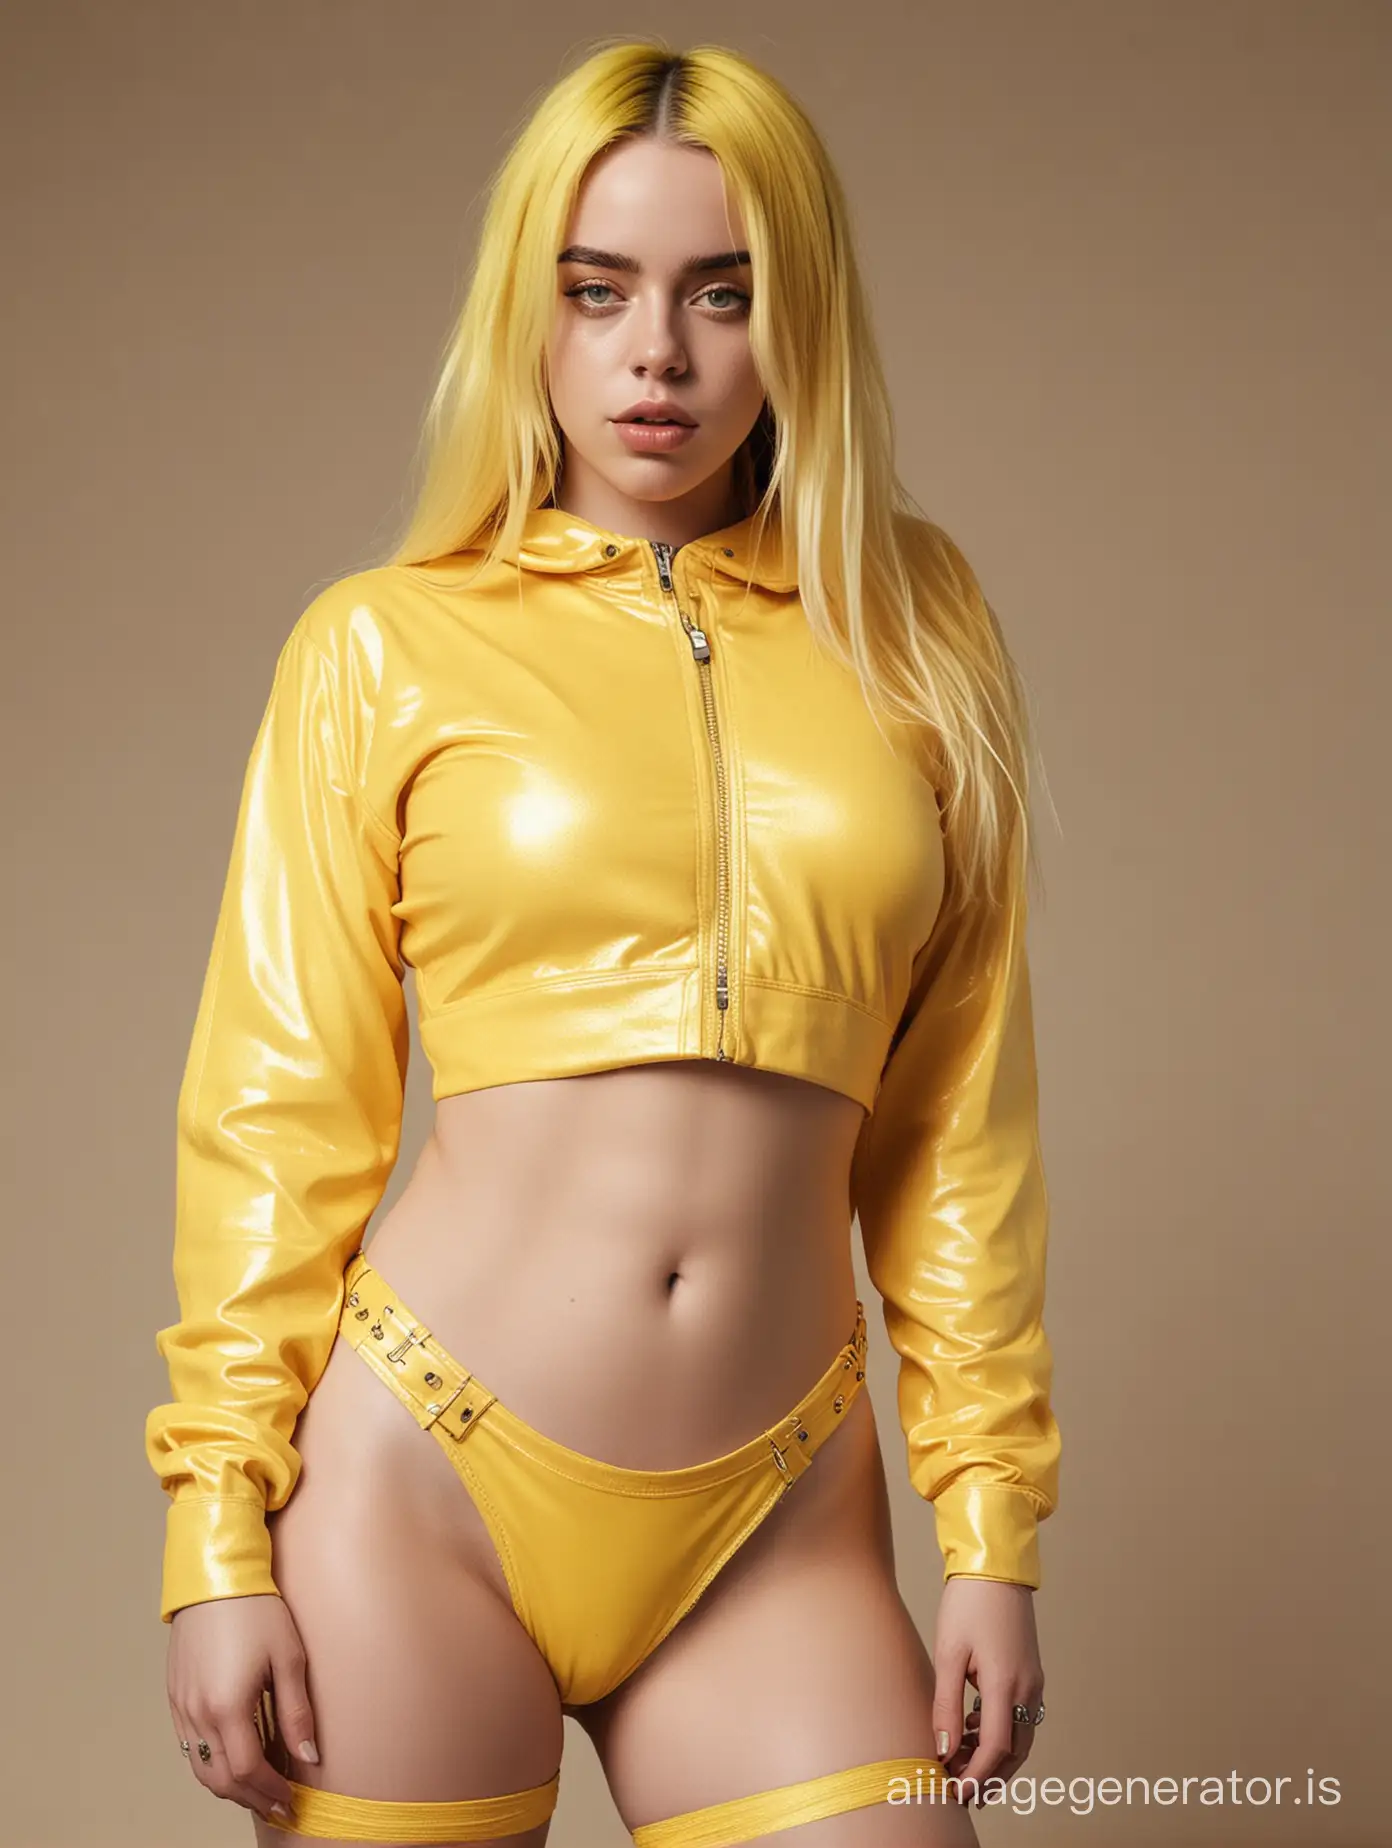 billie eilish ,yellow skimpy outfit, realistic photograph , golden hair